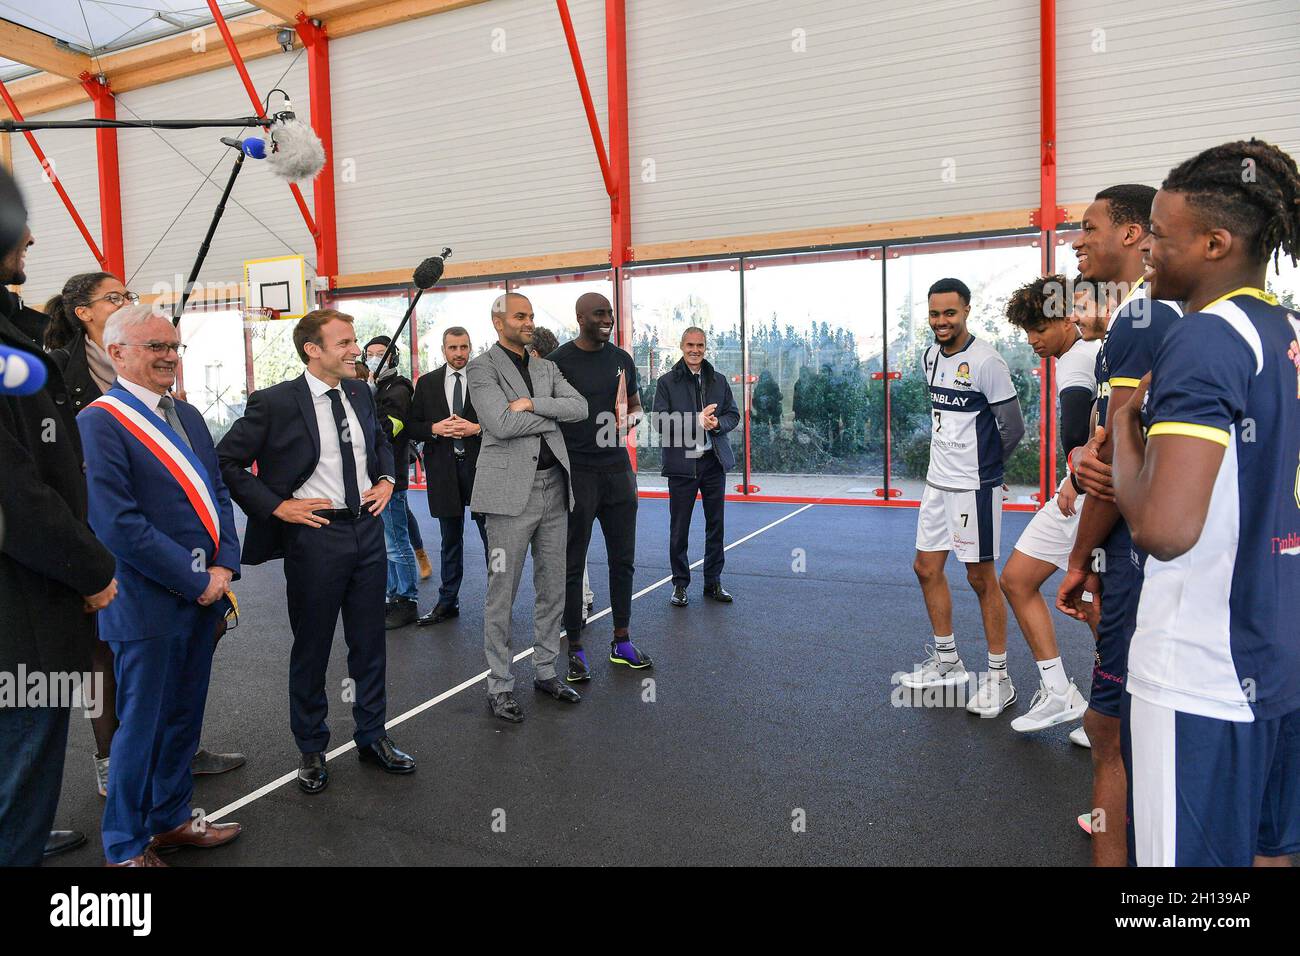 French président Emmanuel Macron, accompanied by the Minister of National Education, Youth and Sport, Jean-Michel Blanquer, Roxana Maracineanu, Minister Delegate, in charge of Sport, mayor of Tremblay en France, Tony Estanguet, Tony Parker, Clementine Autain visited the sports hall in Tremblay en France on 14 October 2021, as part of his visit to the Paris 2024 Olympic and Paralympic Games, to meet with young users and presidents of sports federations Handball, Judo, Basket, Tennis. Tremblay en France, ocotber 14, 2021. Photo by ISA HARSIN/Pool/ABACAPRESS.COM Stock Photo